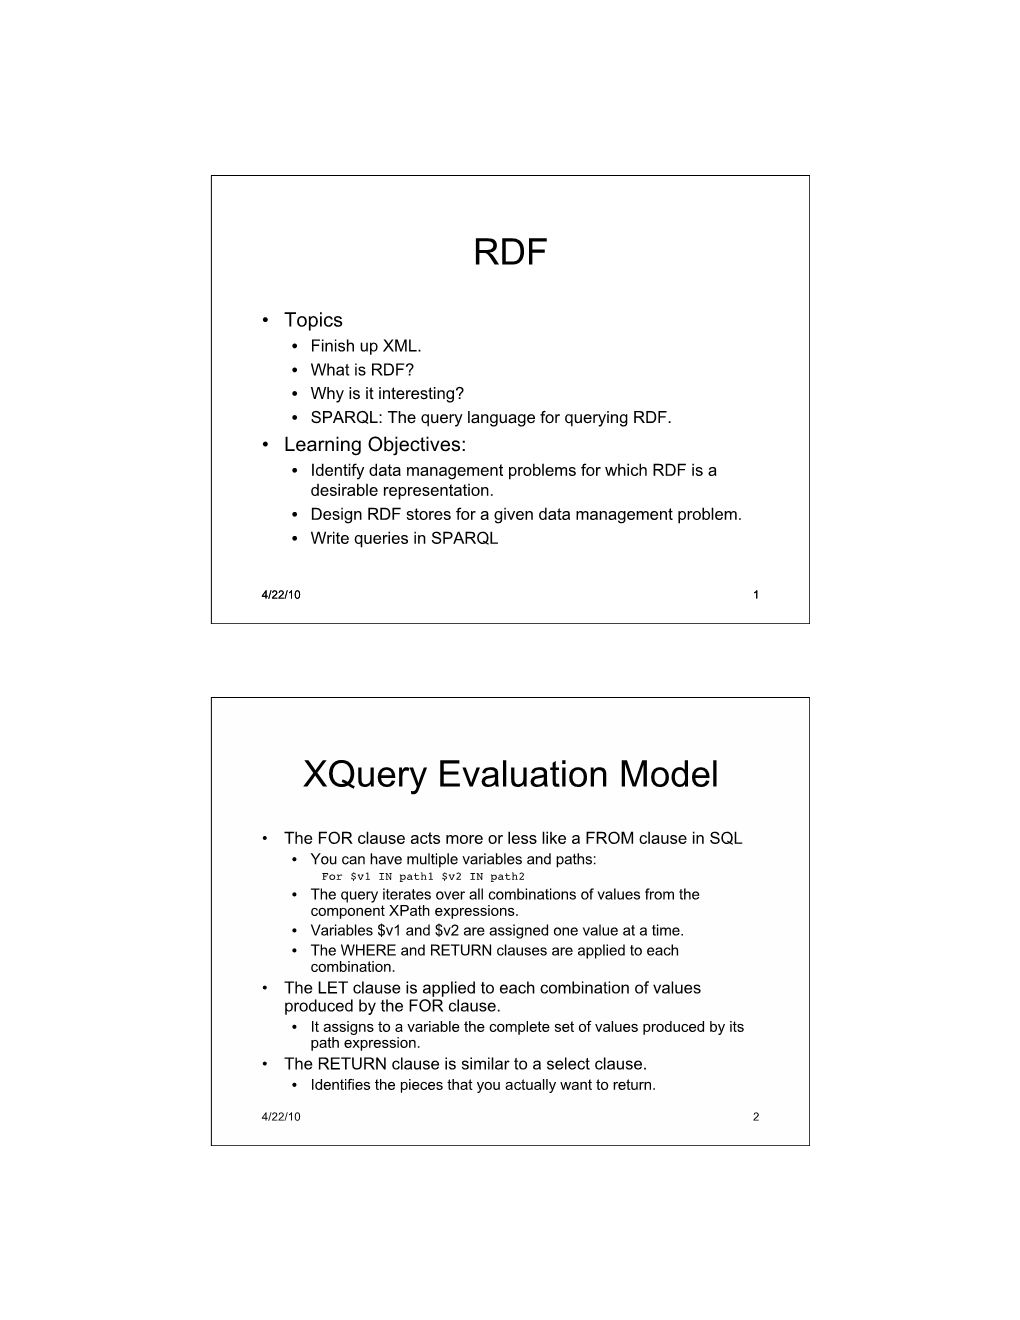 RDF Xquery Evaluation Model